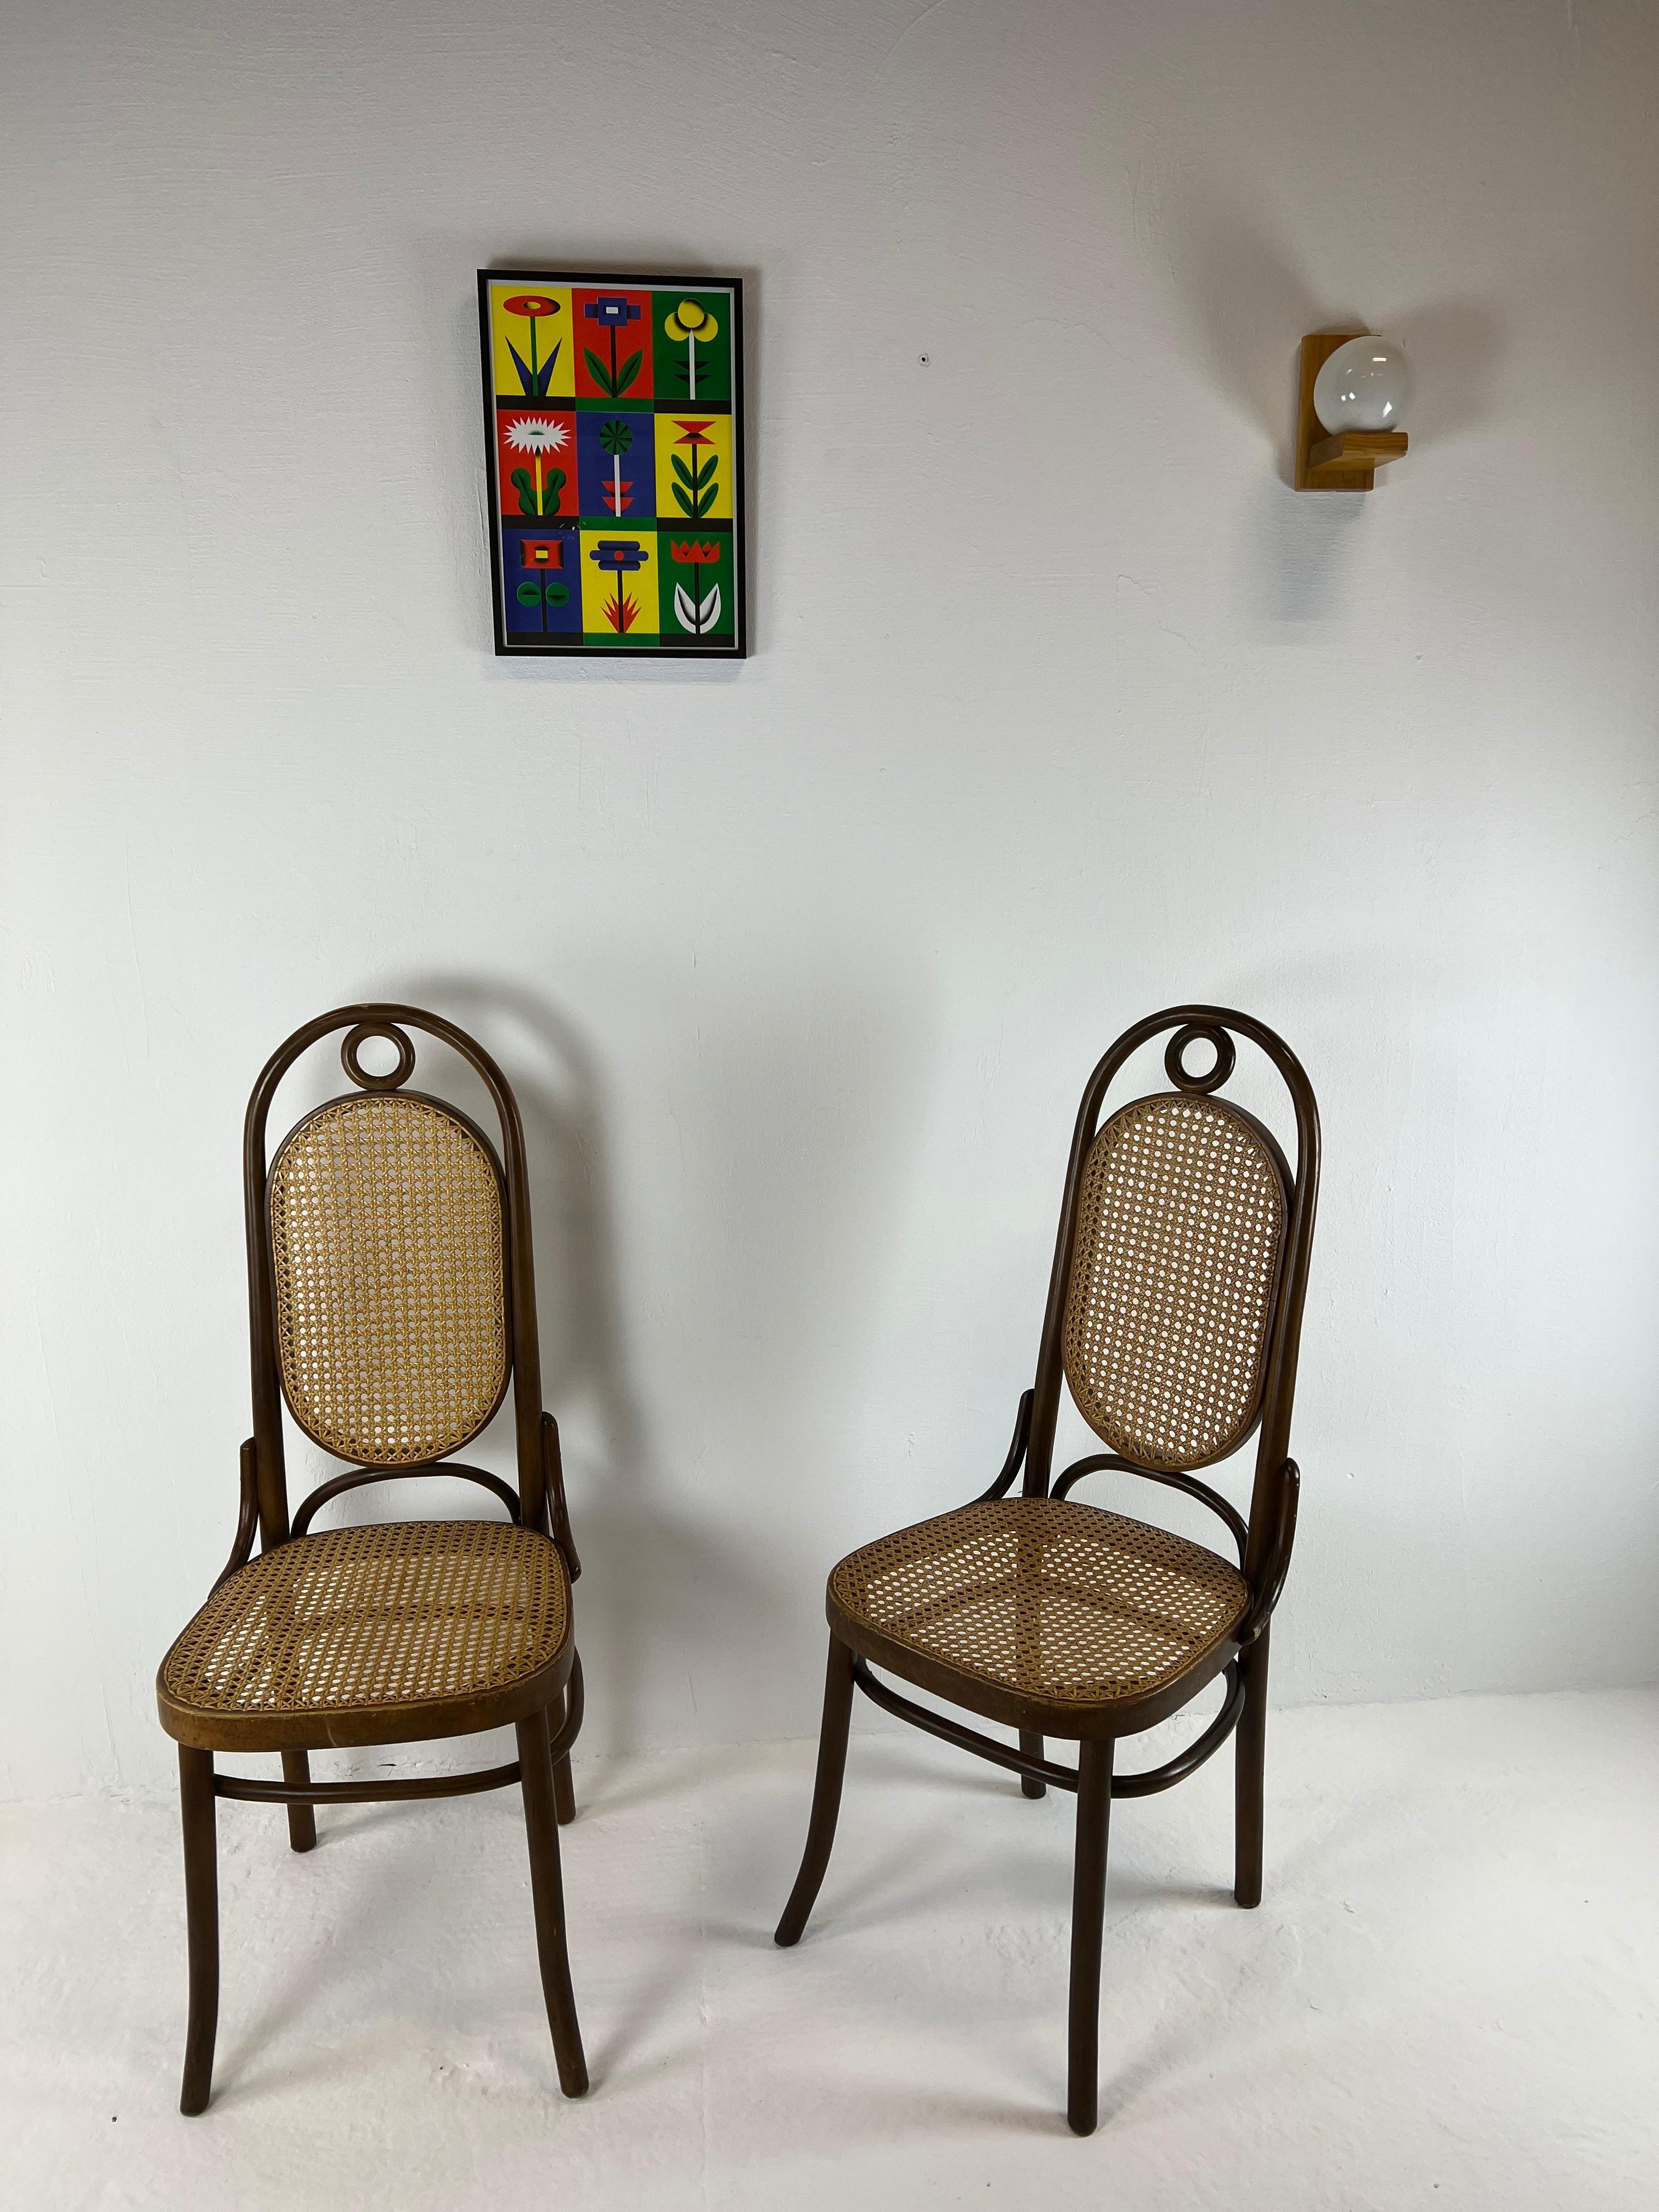 Superb pair of emblematic chairs, Thonet creation around 1865, these copies probably produced by ZPM Radomsko in the mid-20th century. Only wear marks of color are visible at the level of the friction zones.